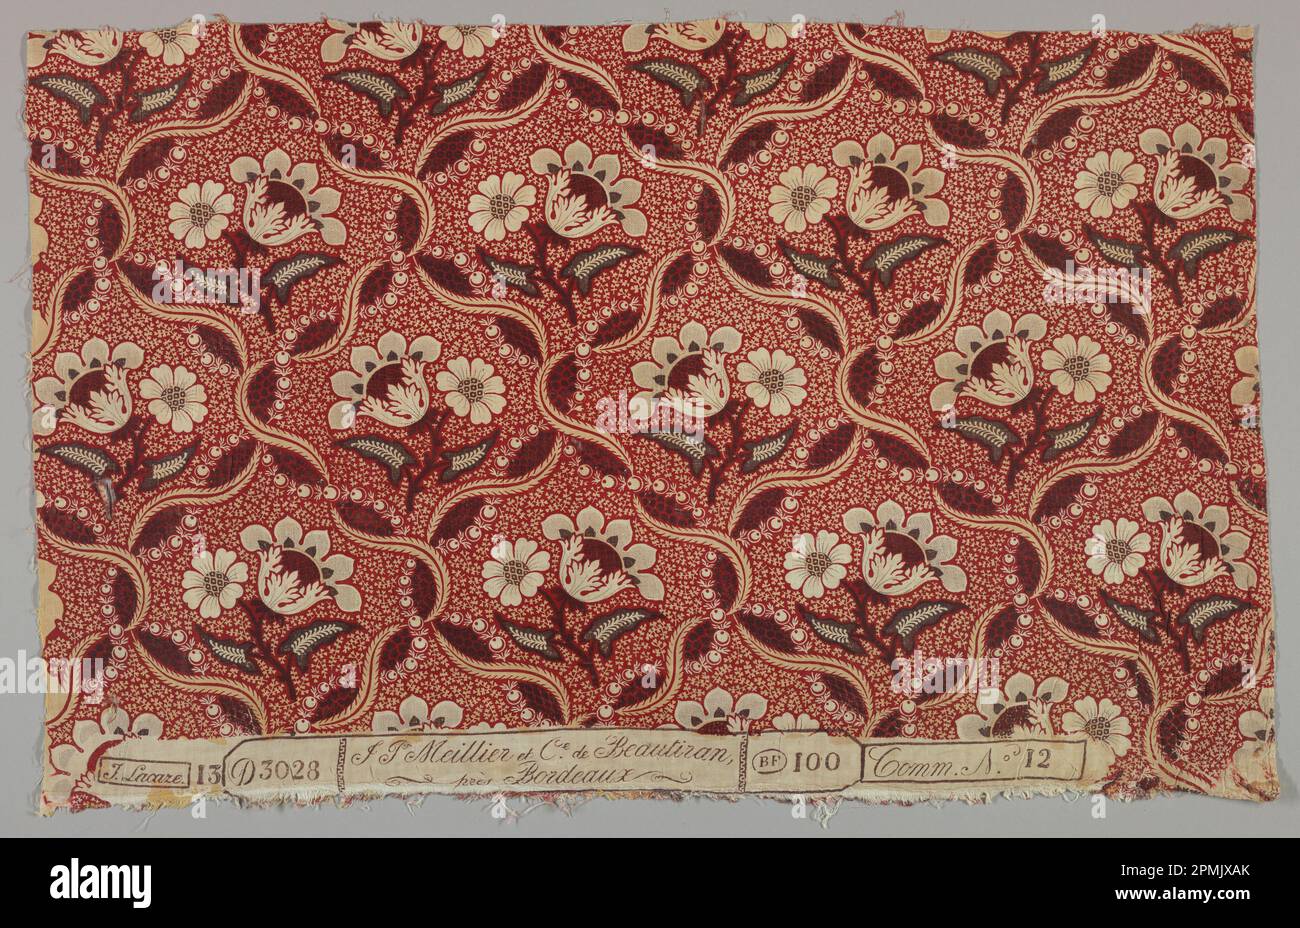 Textile (France); Company: J.P.Meiller et Cie.; cotton; Warp: 54 cm (21 1/4 in.). Weft: 82.5 cm (32 1/2 in.). All edges of fabric are cut. Pattern: Height: 25 cm (10 in.). Width: 20 cm (8 in.). Stock Photo